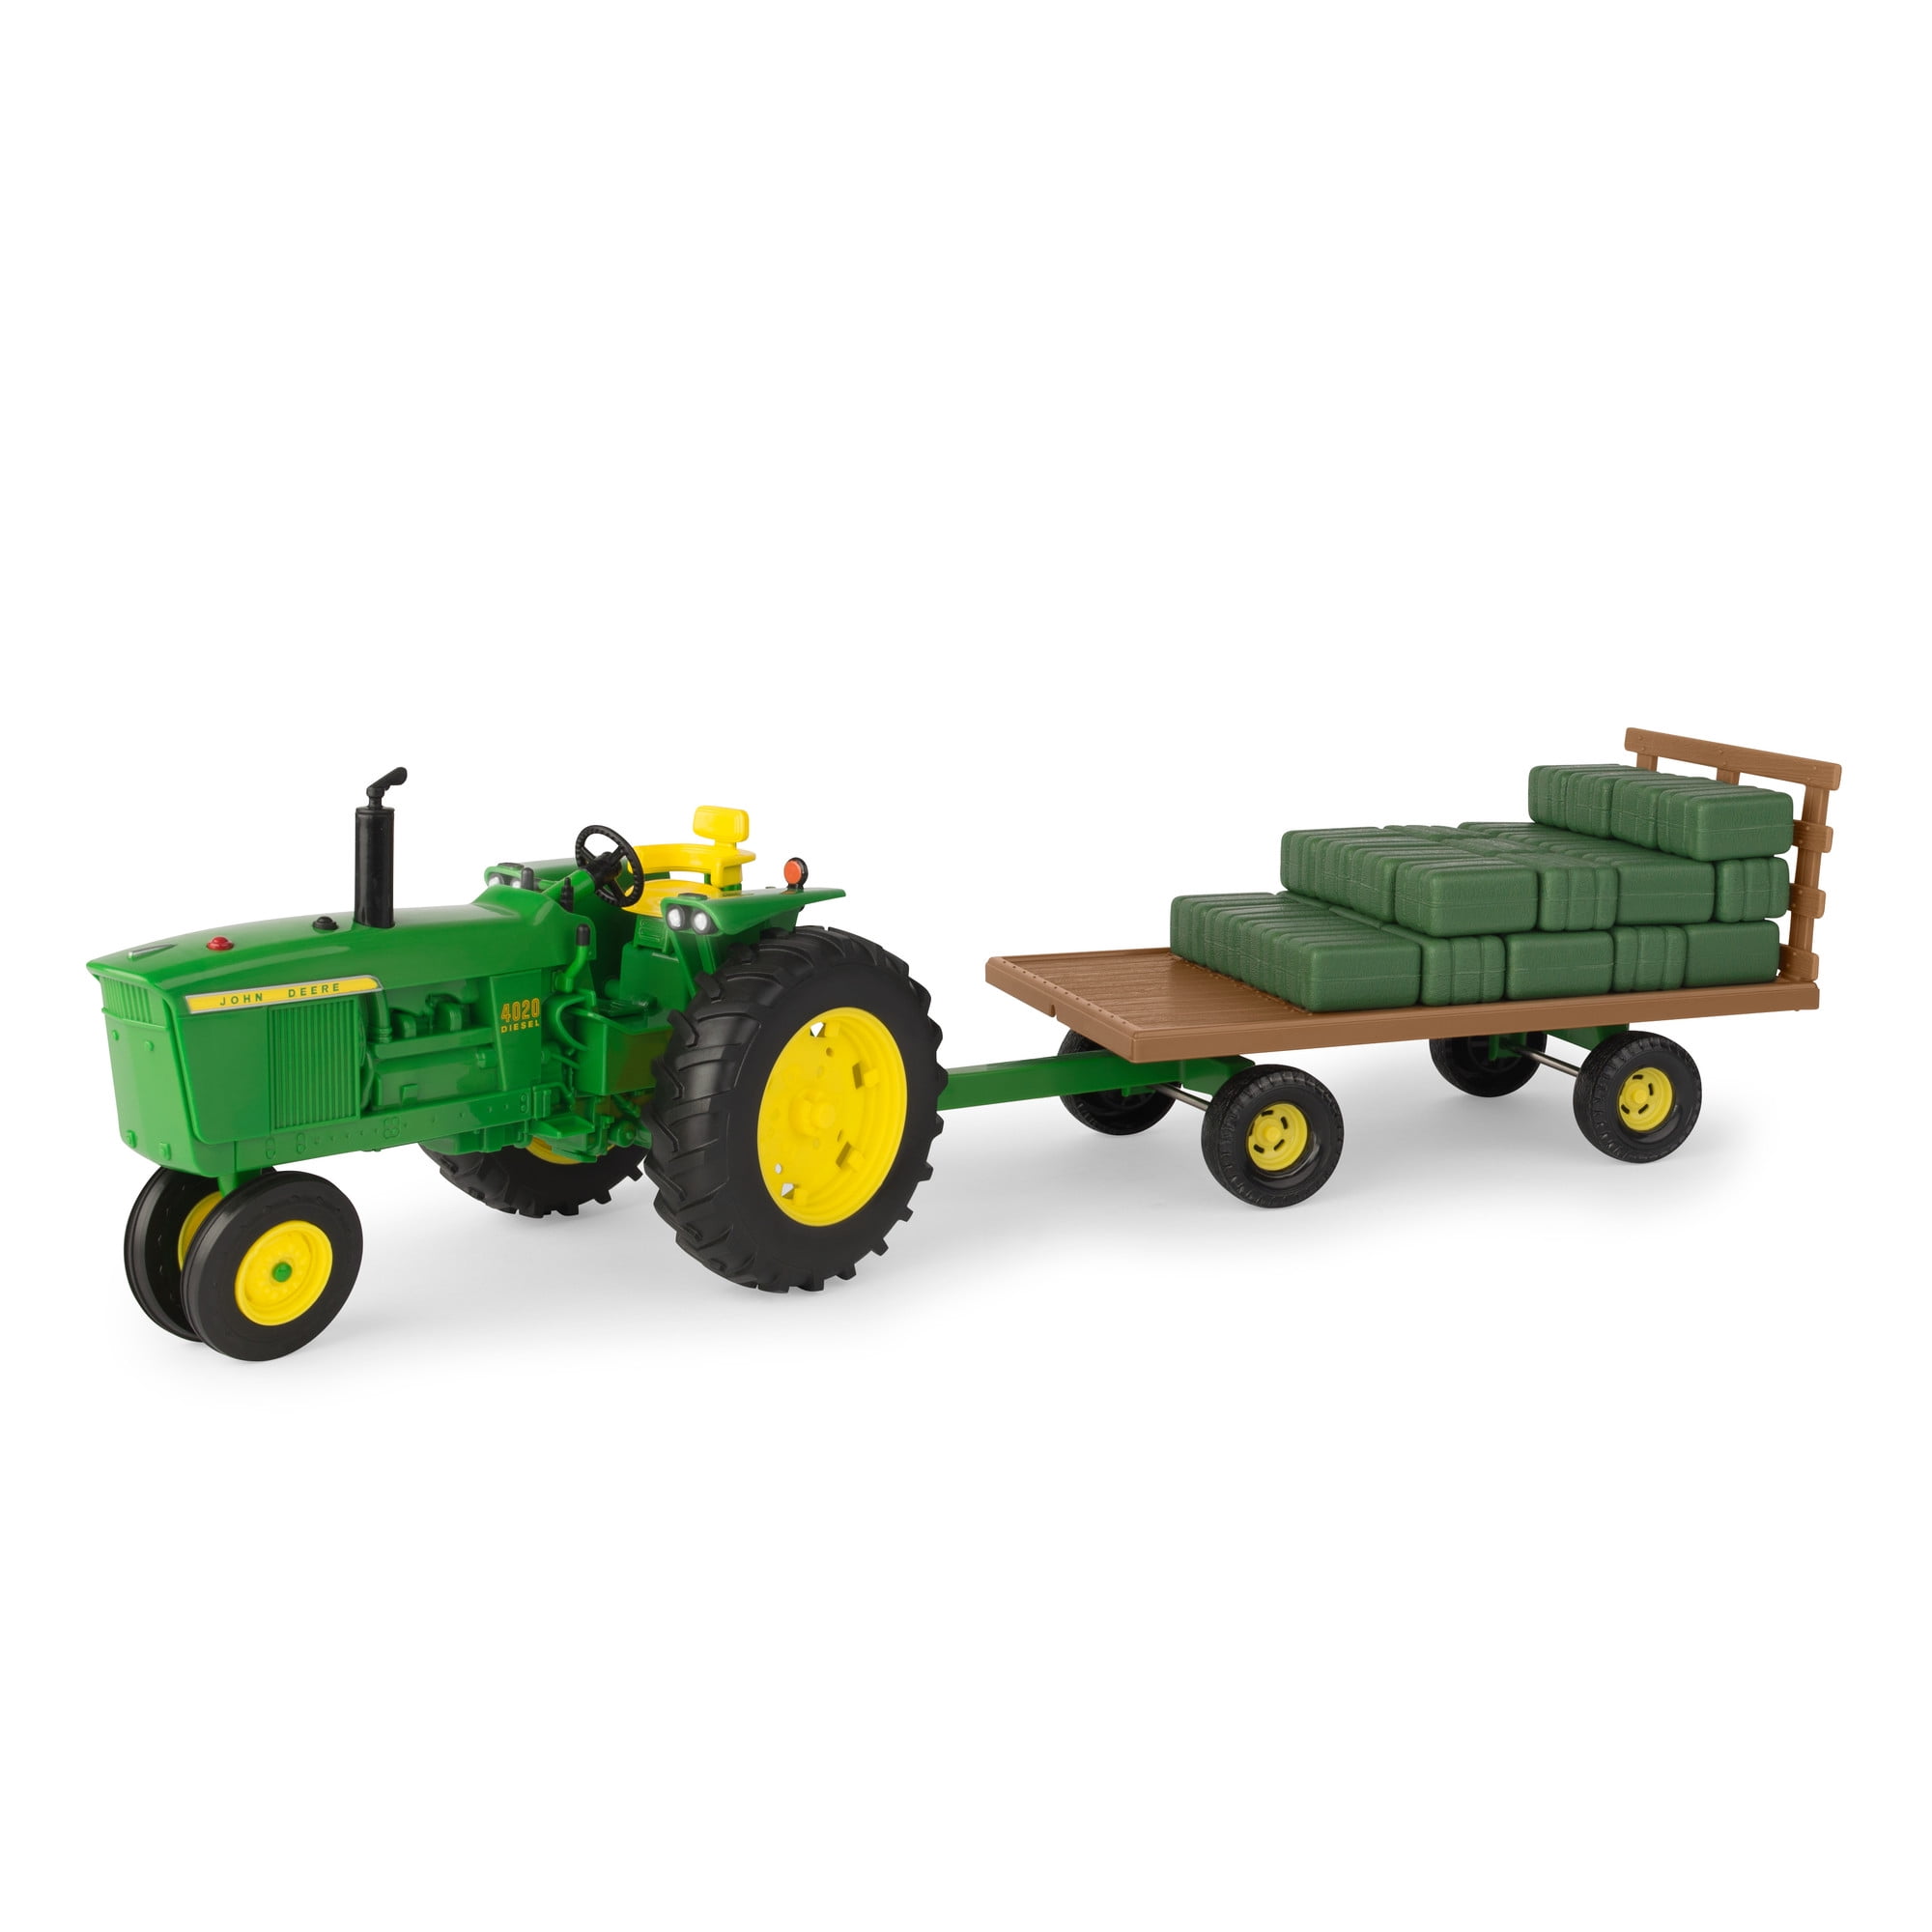 Tomy 1/32 John Deere 4020 Haying Set W/ Tractor Baler and Wagon 46667 for sale online 